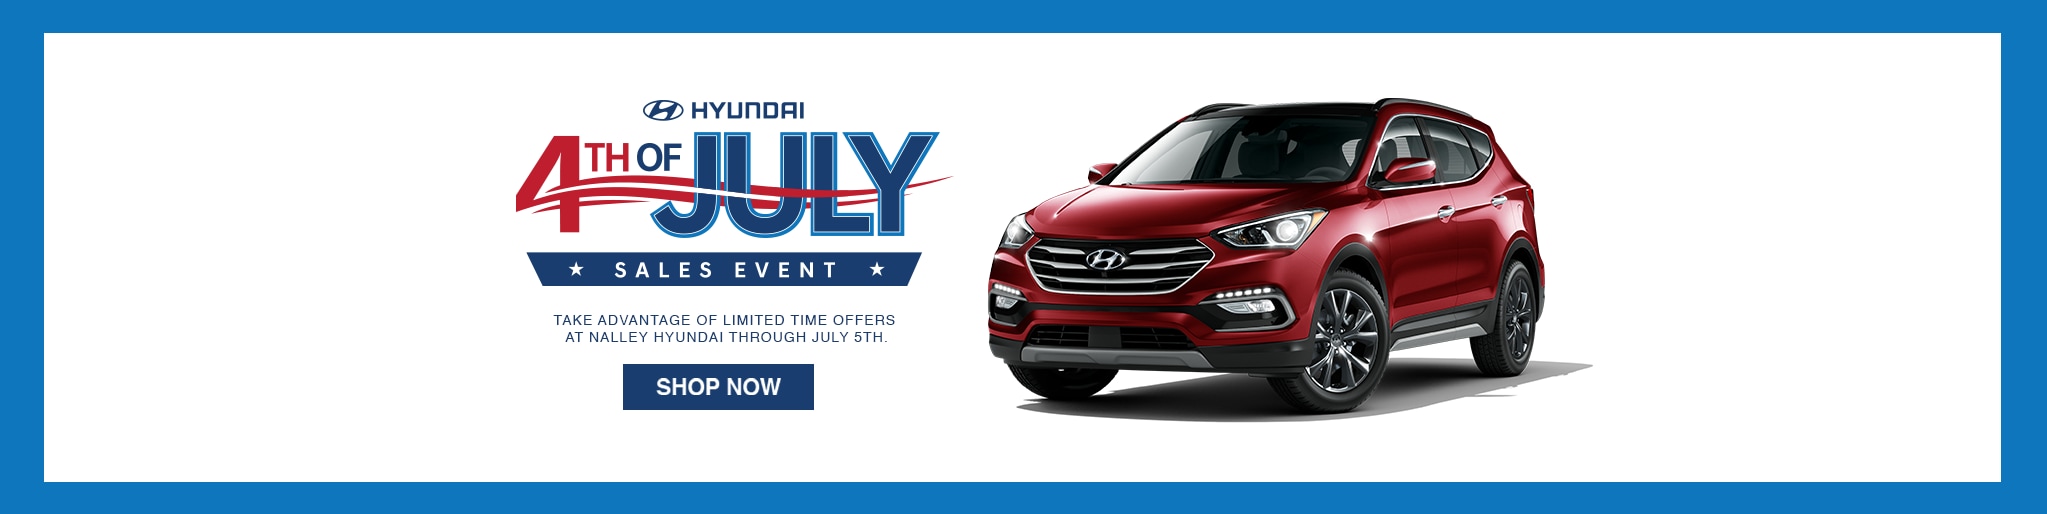 4th of July Specials Hyundai Fourth of July Savings & Service Offers